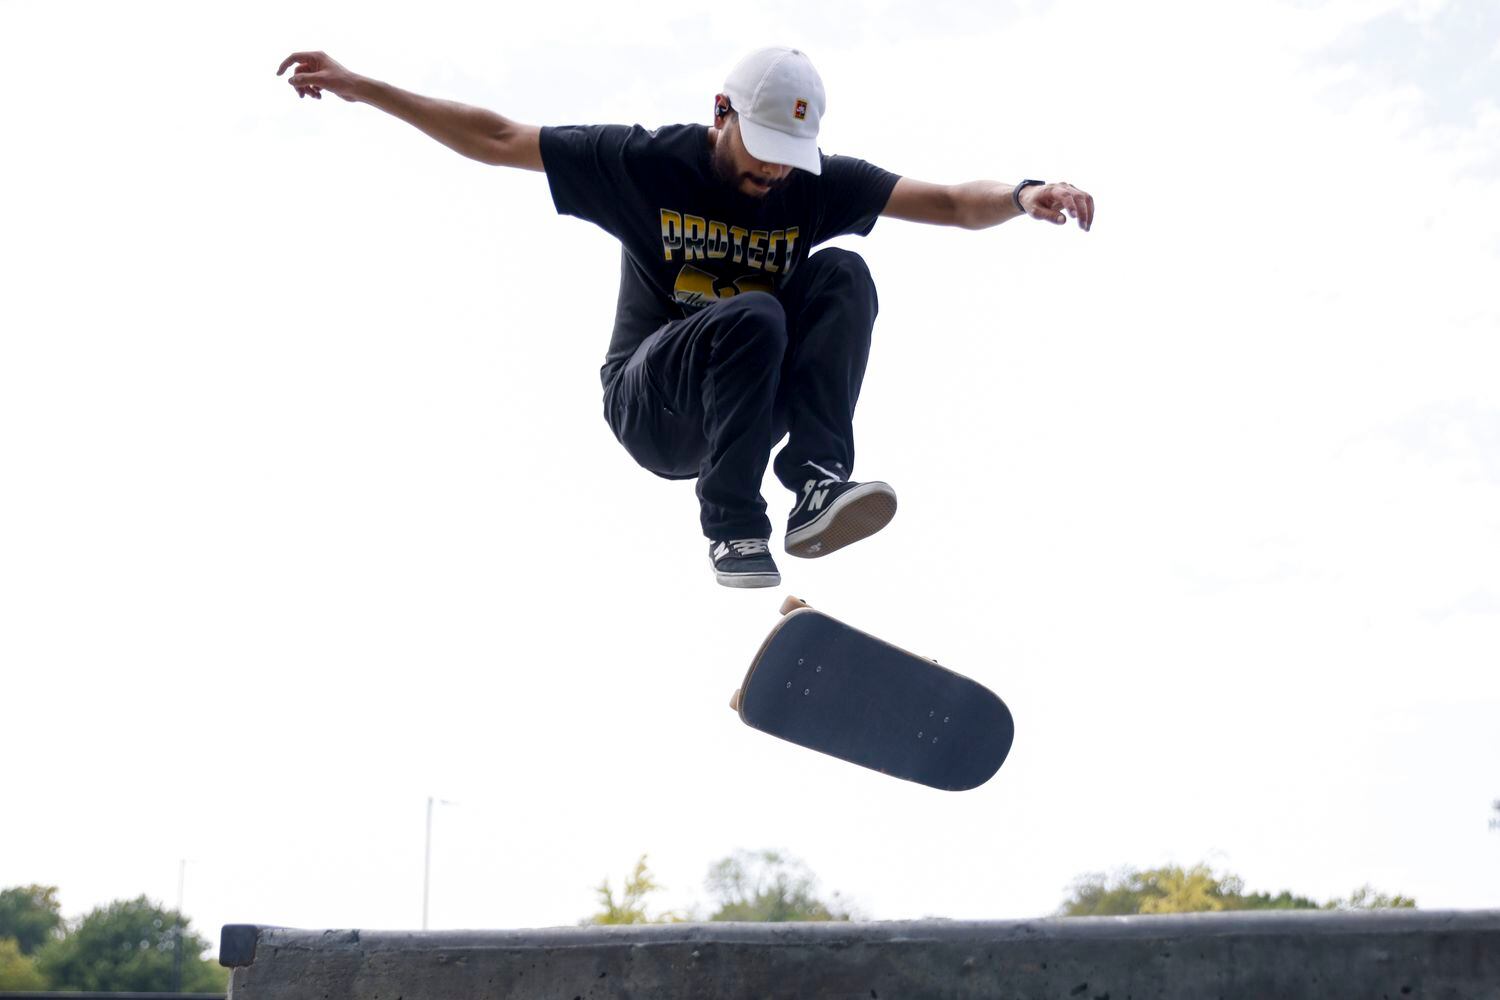 Isaac Contreras, 26, performs a trick as he skateboards at the Jon Comer Skatepark,...